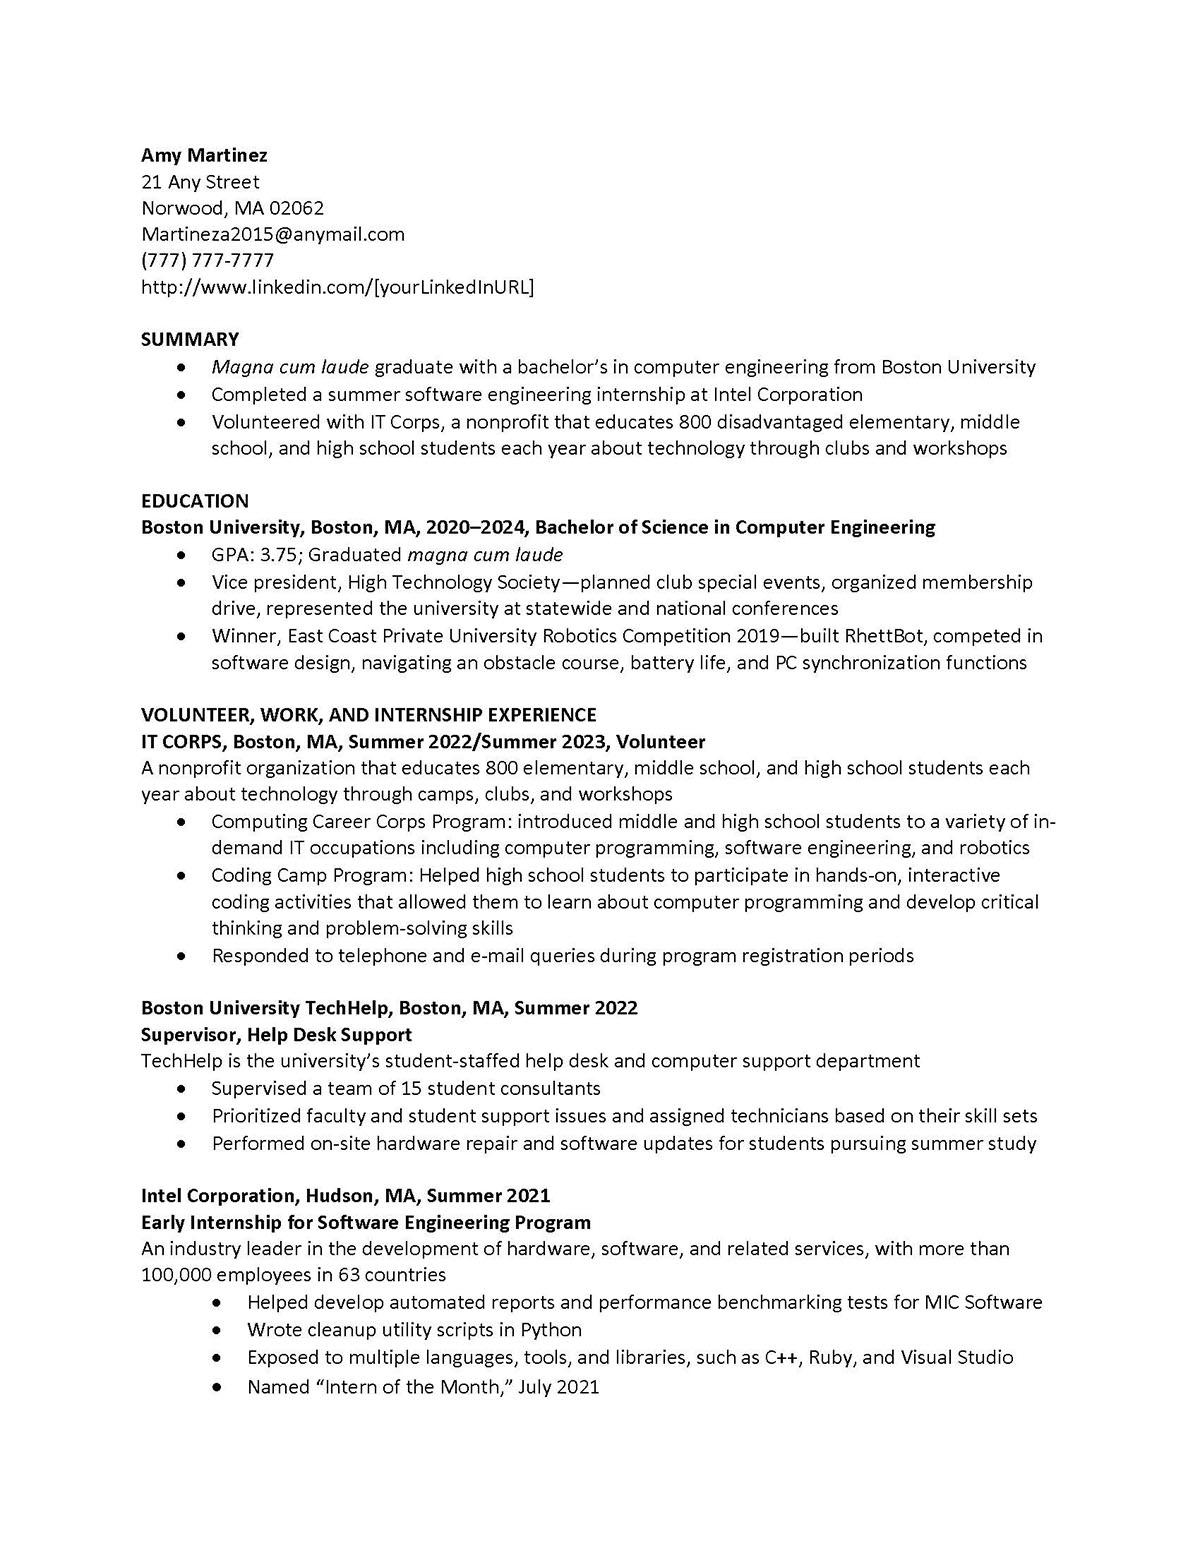 Sample resume: Information Technology, Entry Level, Combination